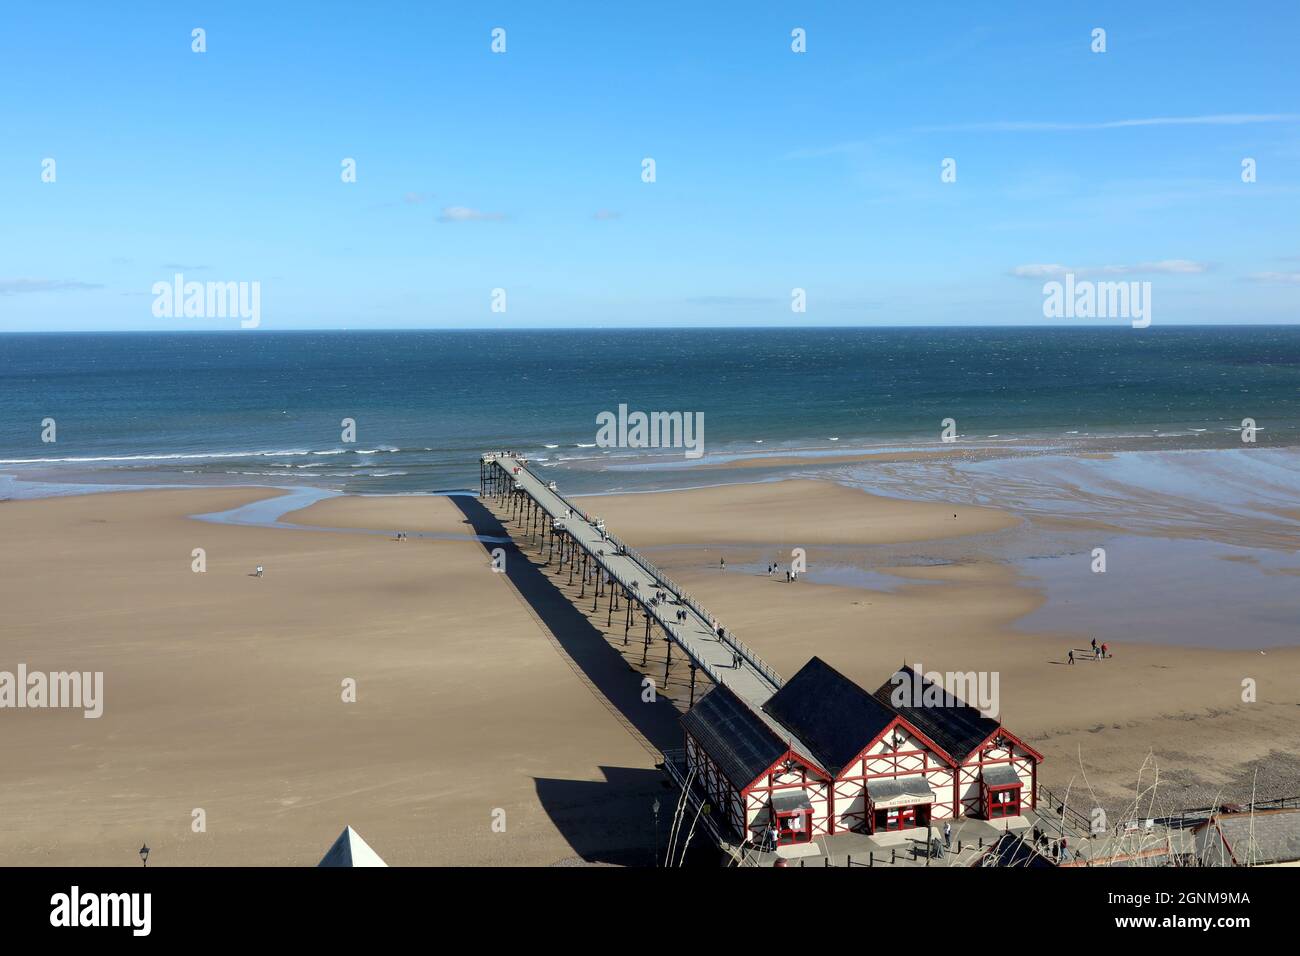 22 September 2021: View of Saltburn Pier in Saltburn-by-the-Sea in North Yorkshire, England Stock Photo